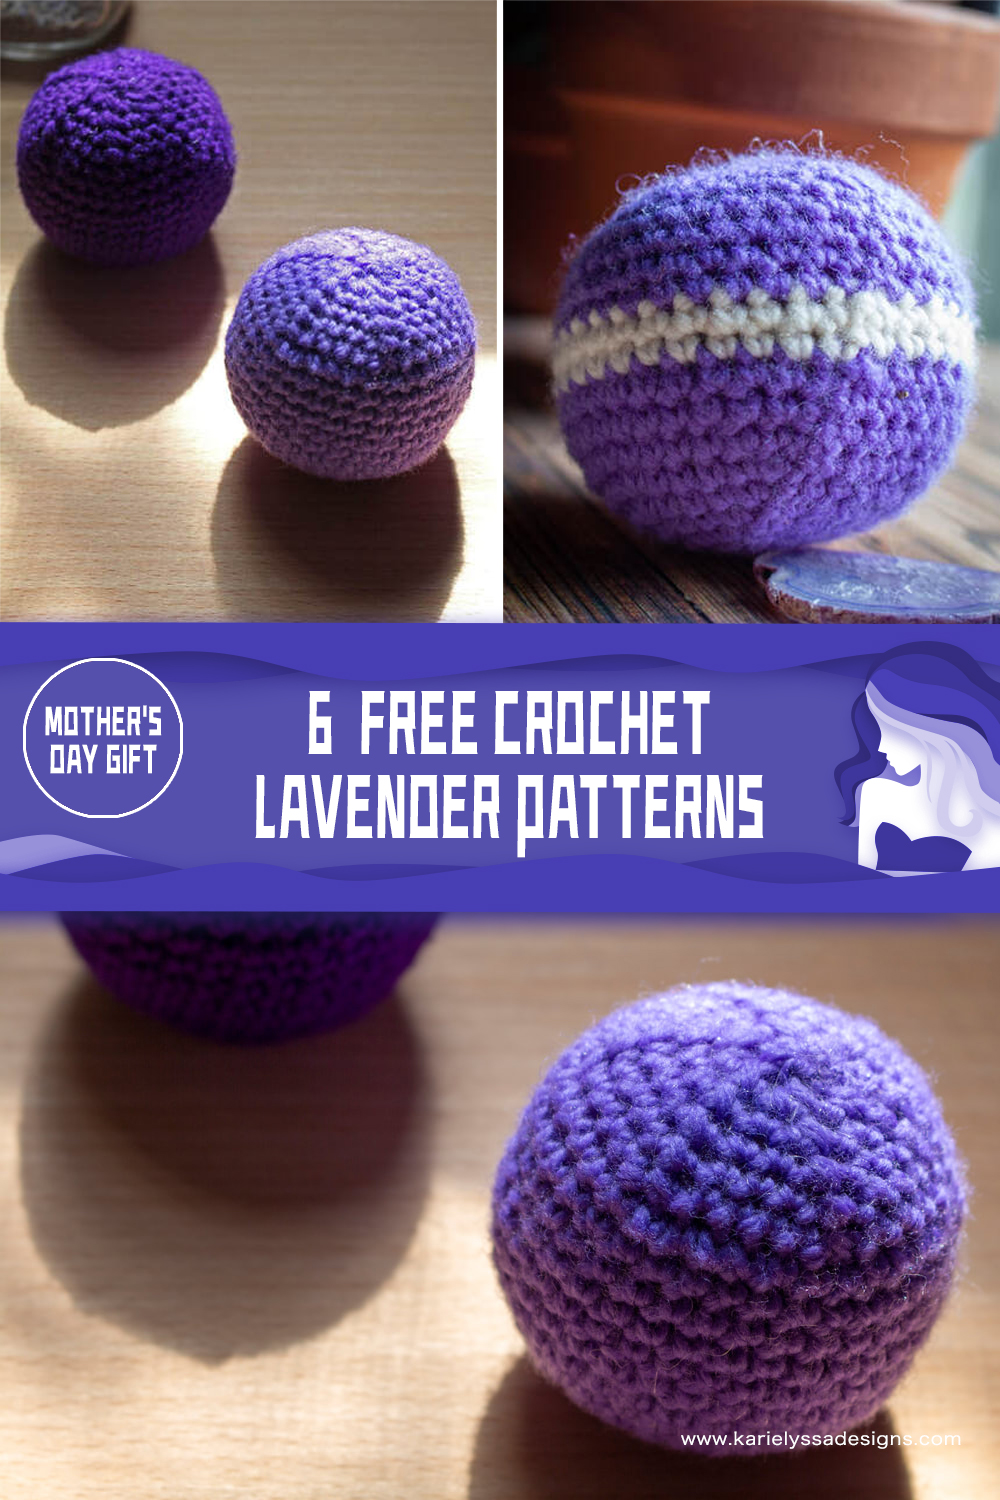  FREE Crochet Lavender Patterns - Mother's Gift